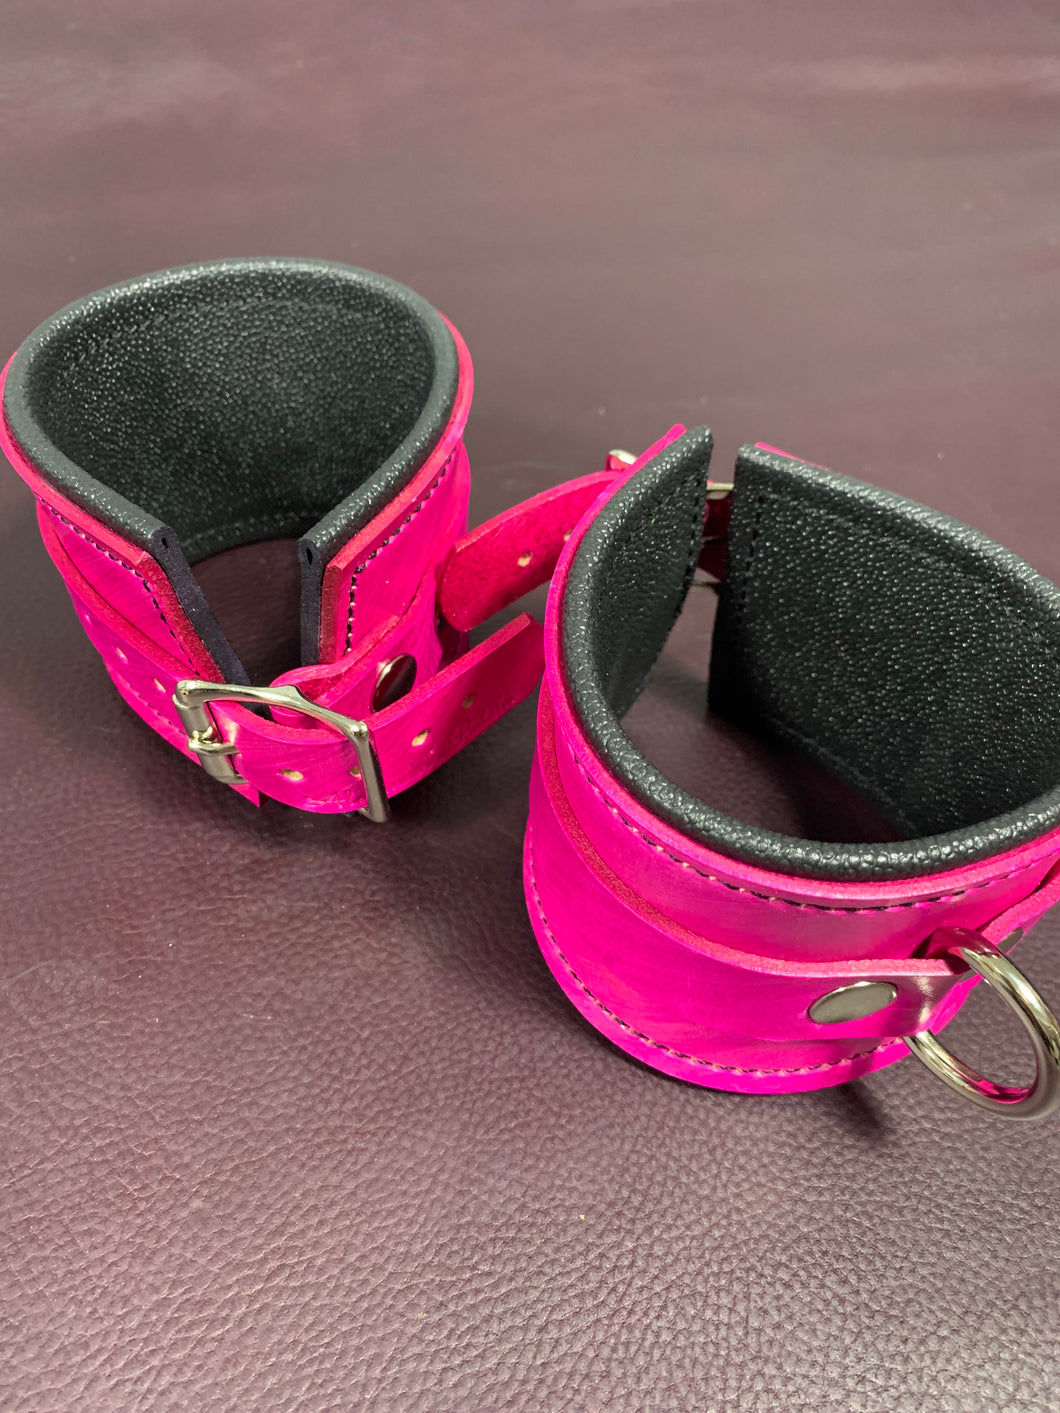 Cuffs: Ankle Cuffs in Pink and Black Leather, One Pair